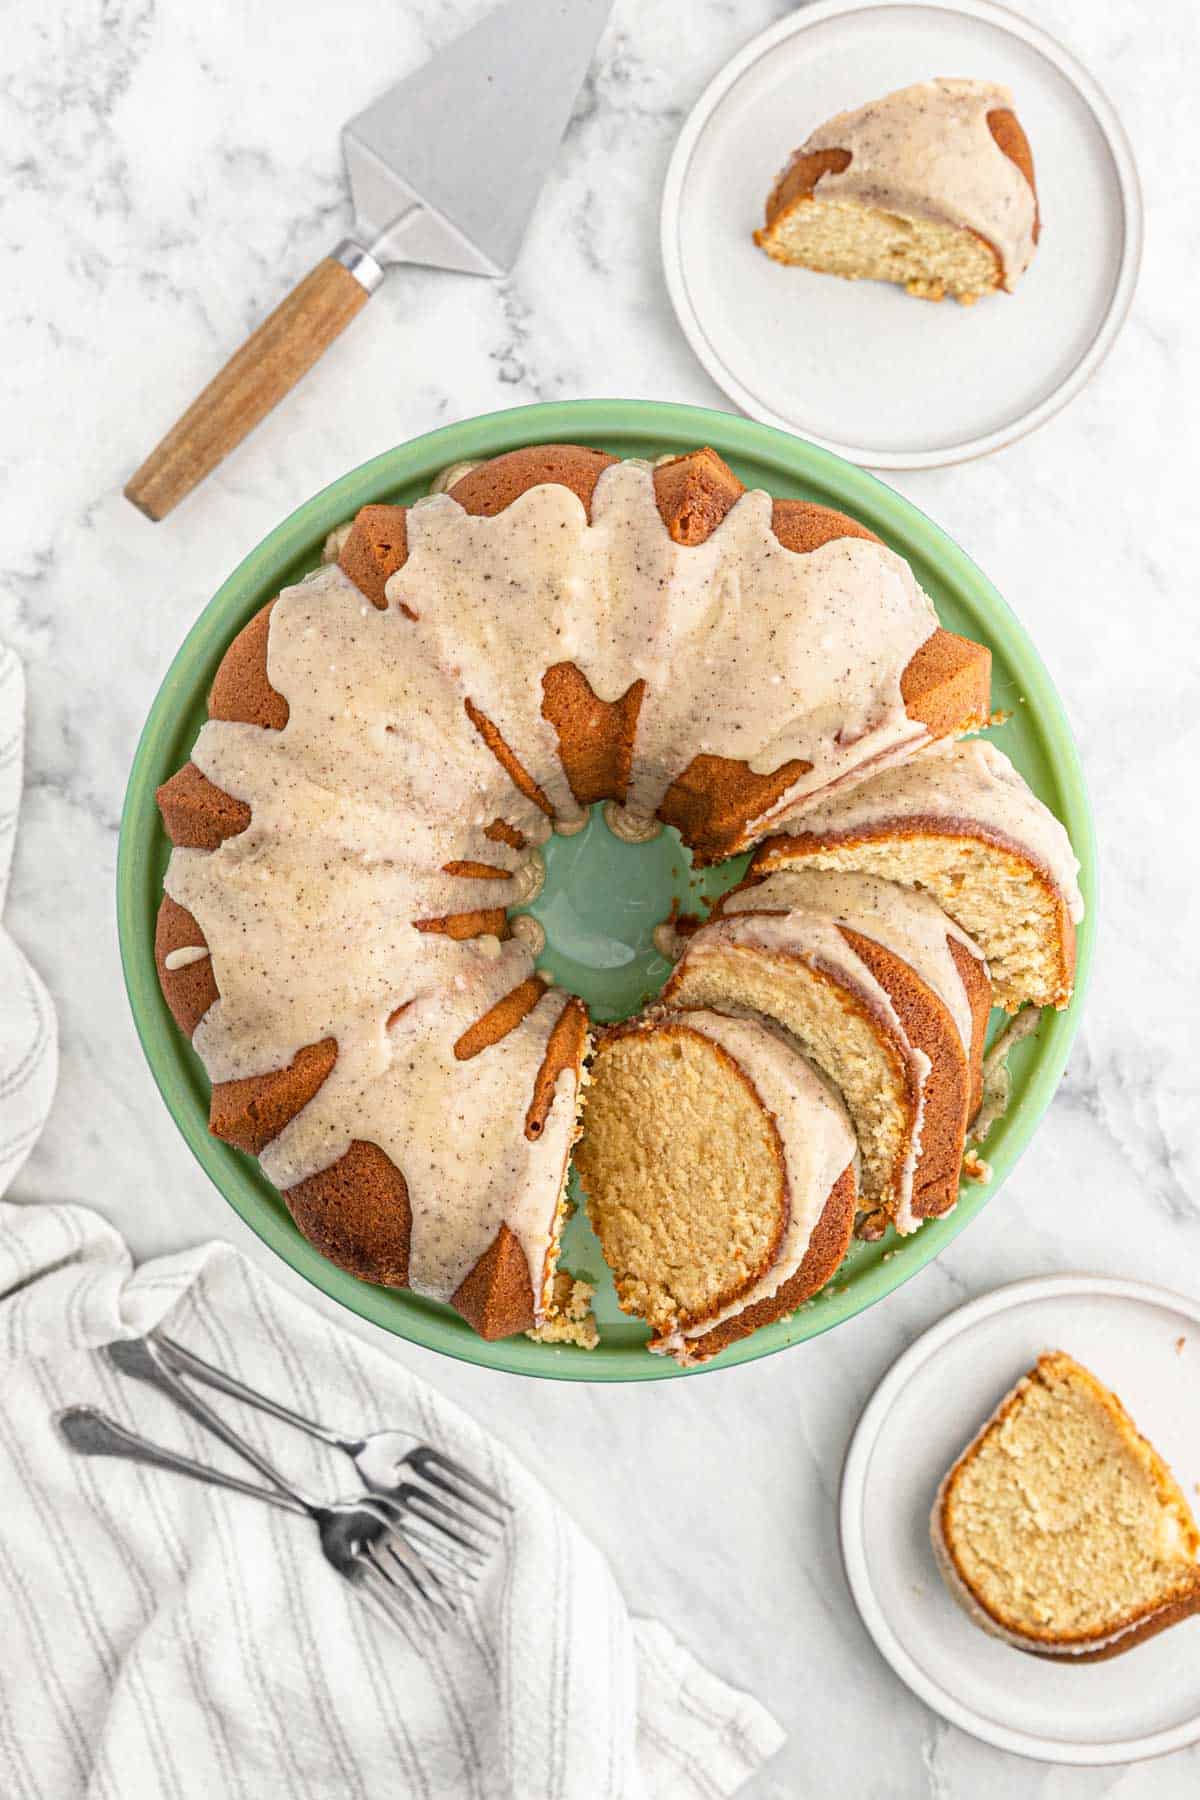 Brown Sugar Pound Cake with Brown Butter Glaze with a slice missing on a circular, white plate